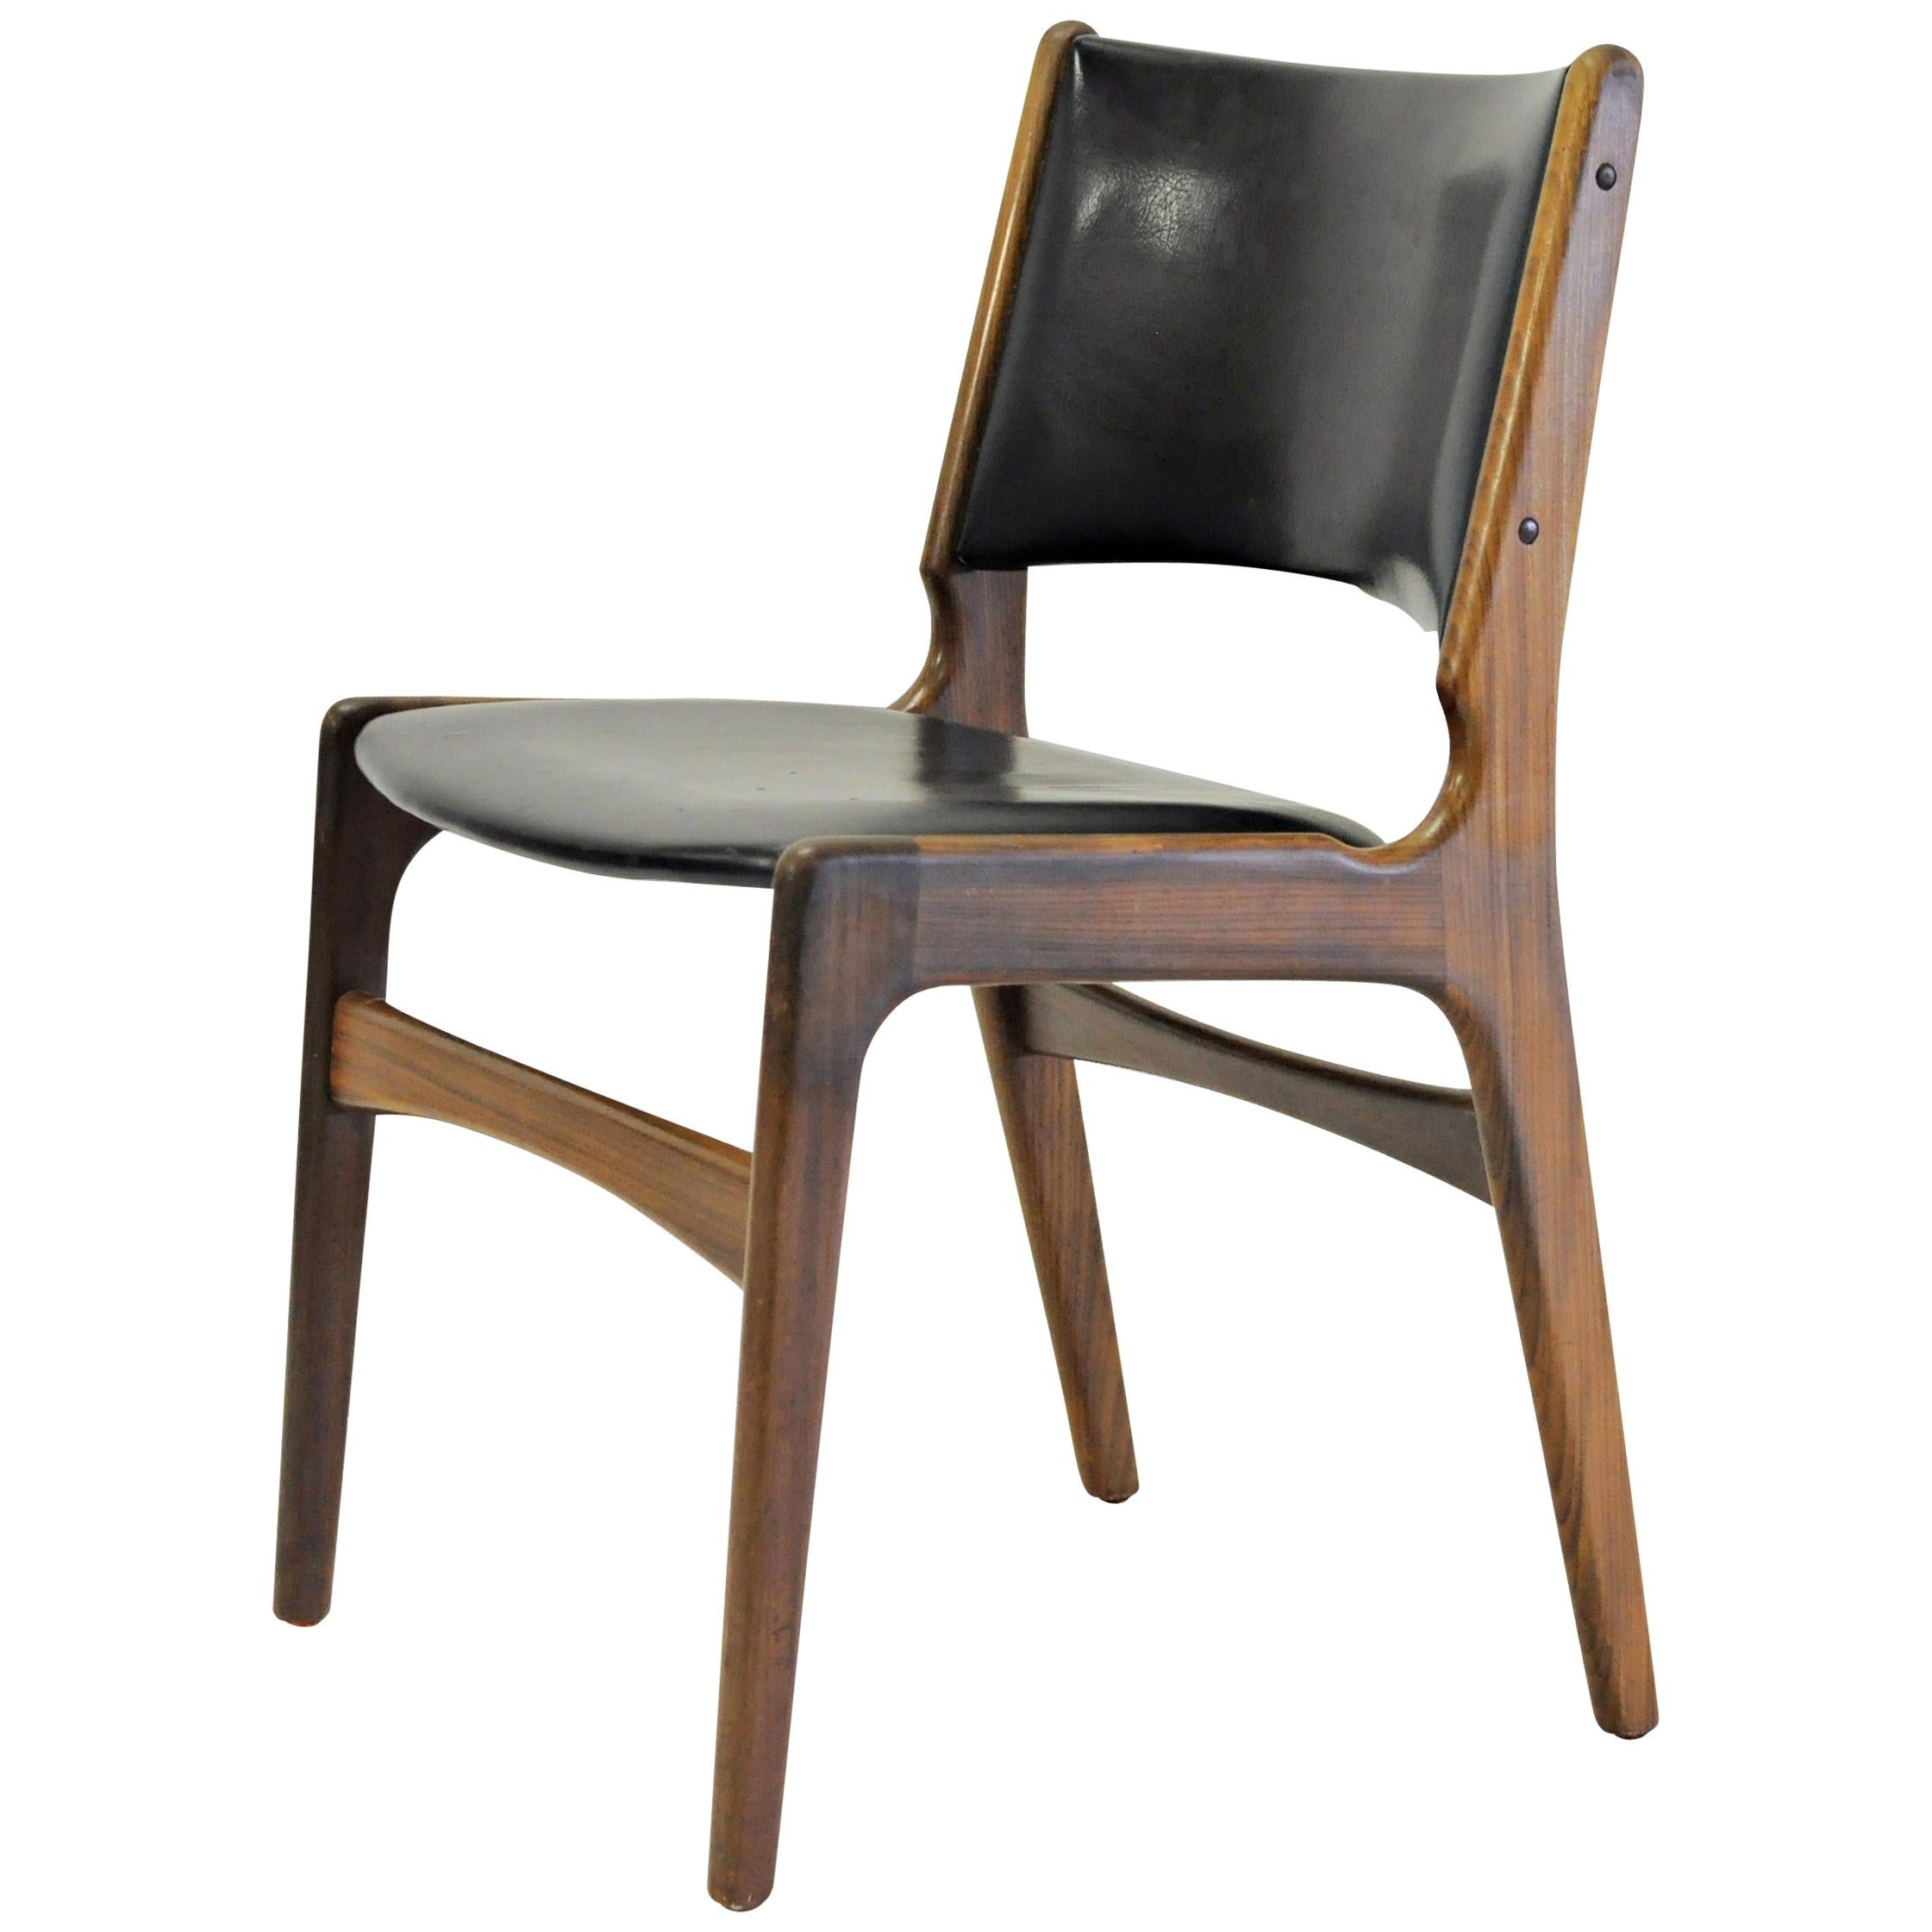 Erik Buch Restored and Refinished Danish Teak Dining Chairs with Black Leather